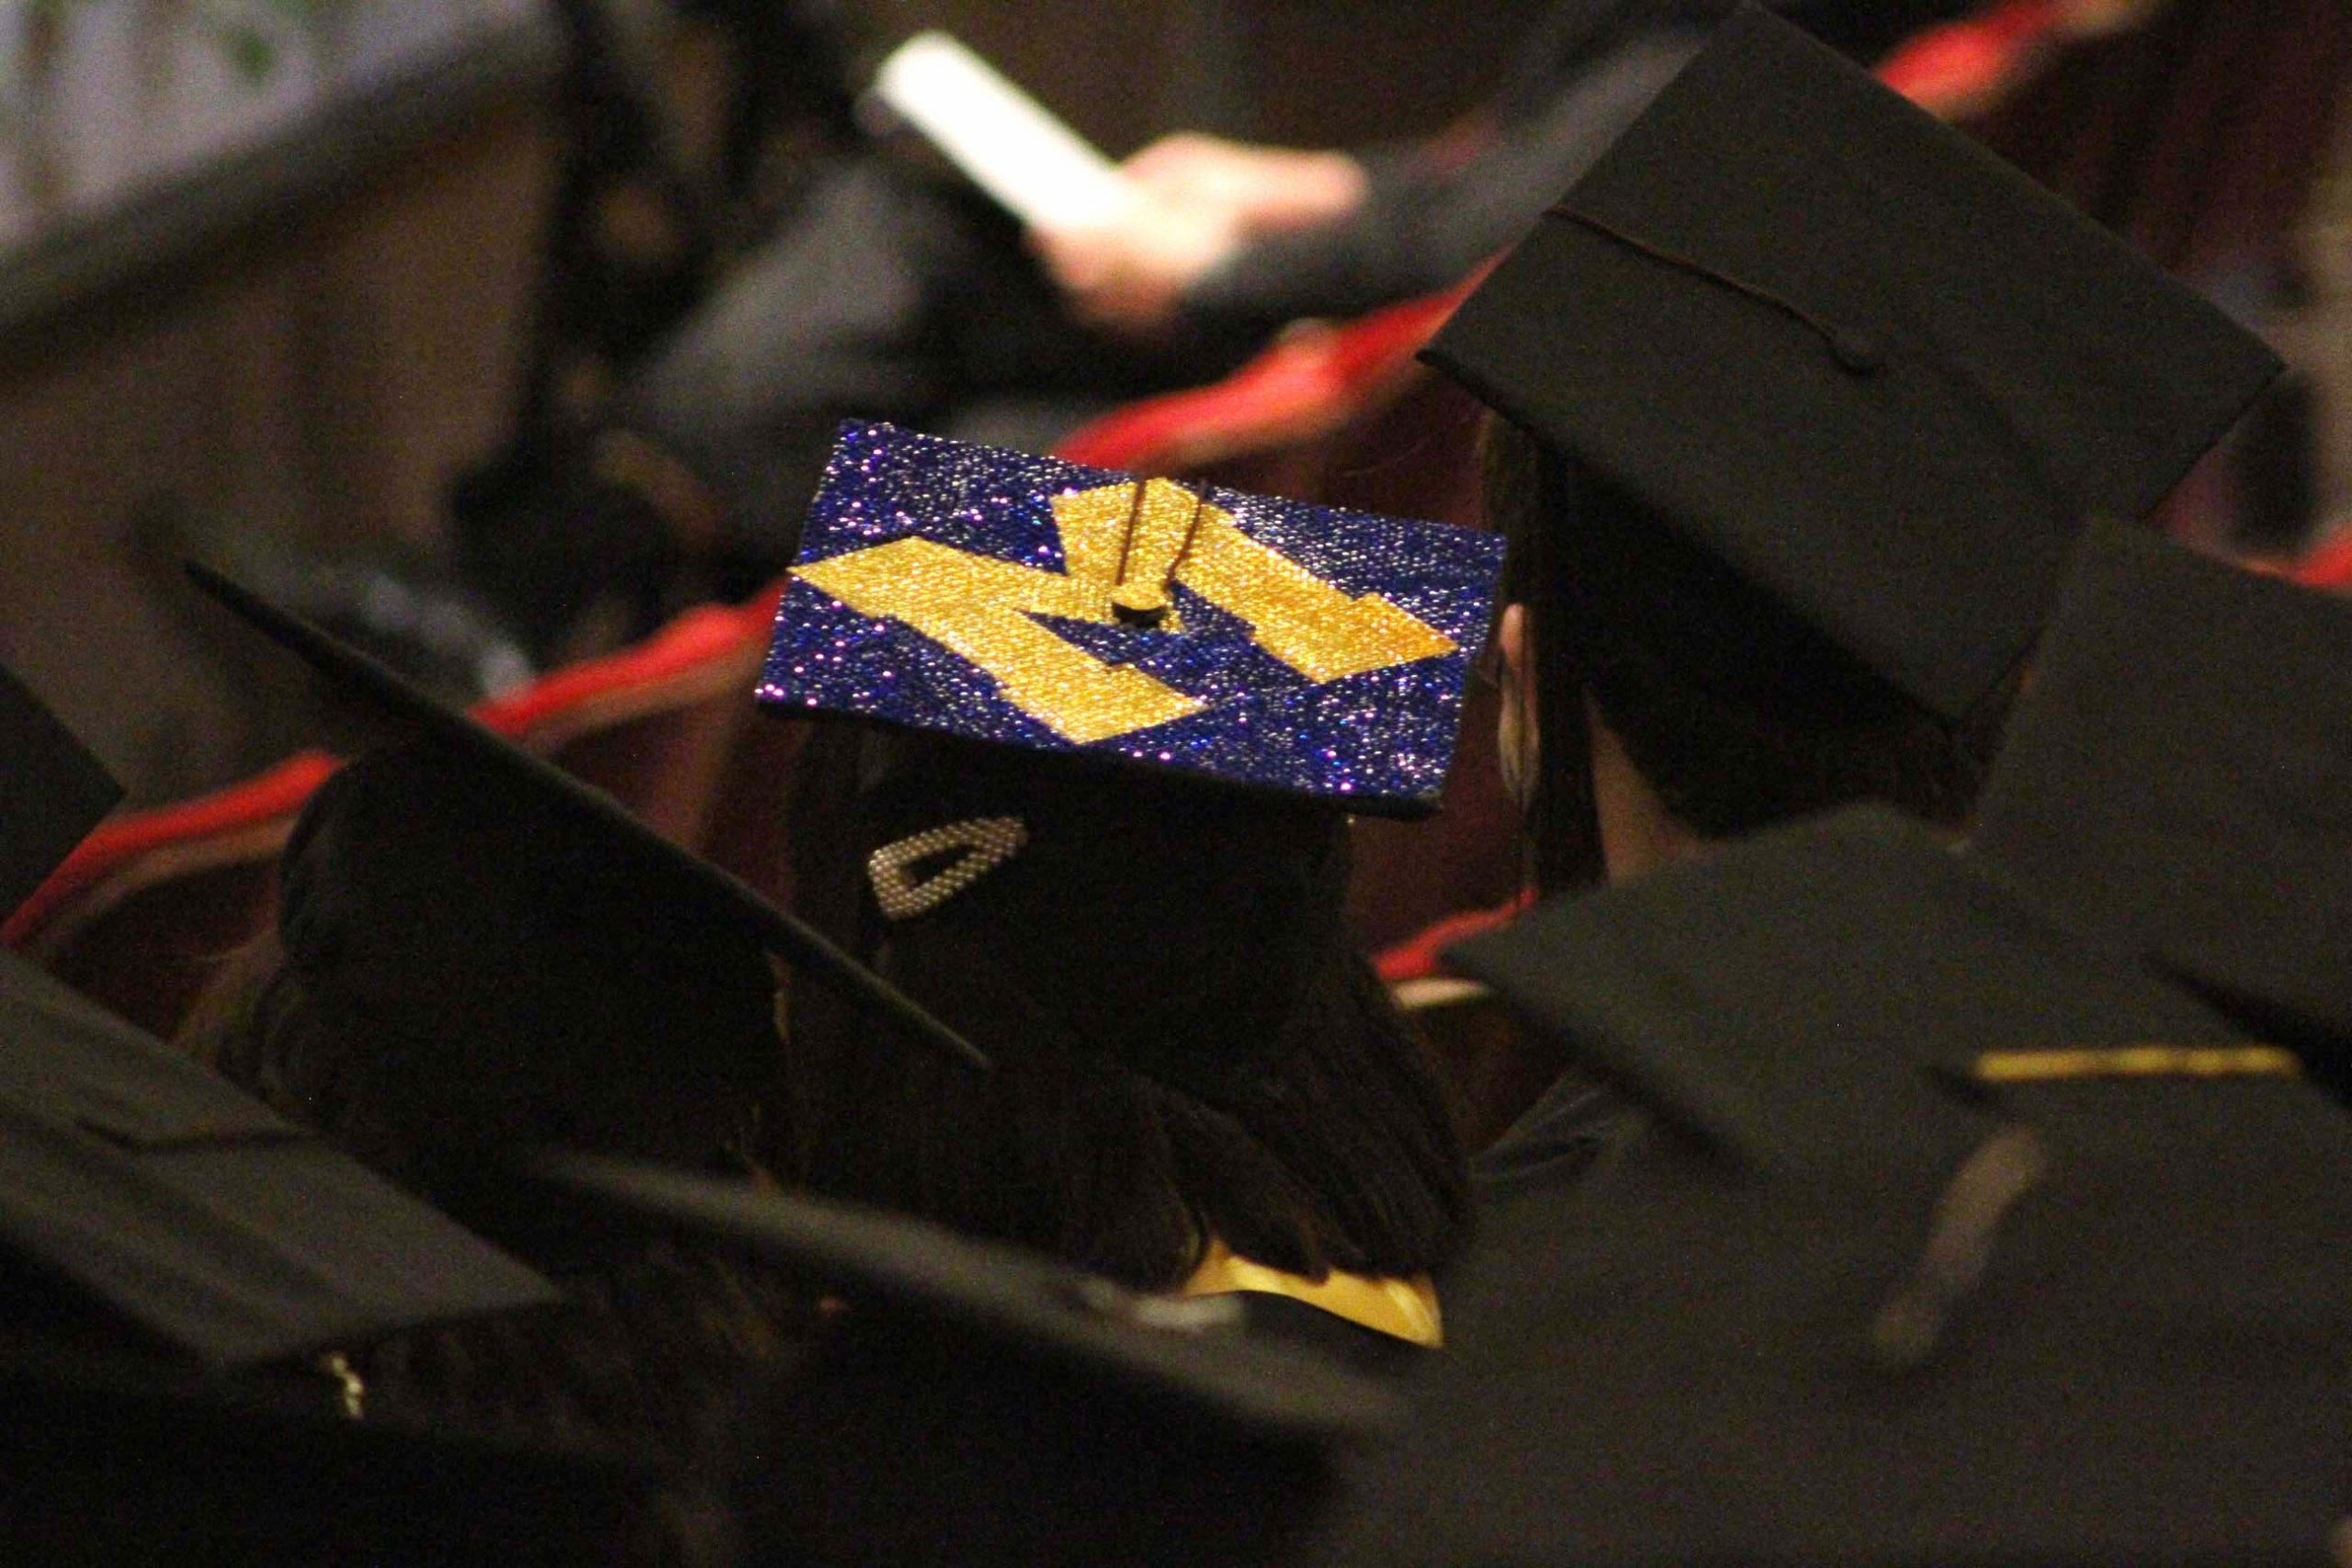 Amid rows of black mortar board graduation caps, one is covered in a glittering block M.